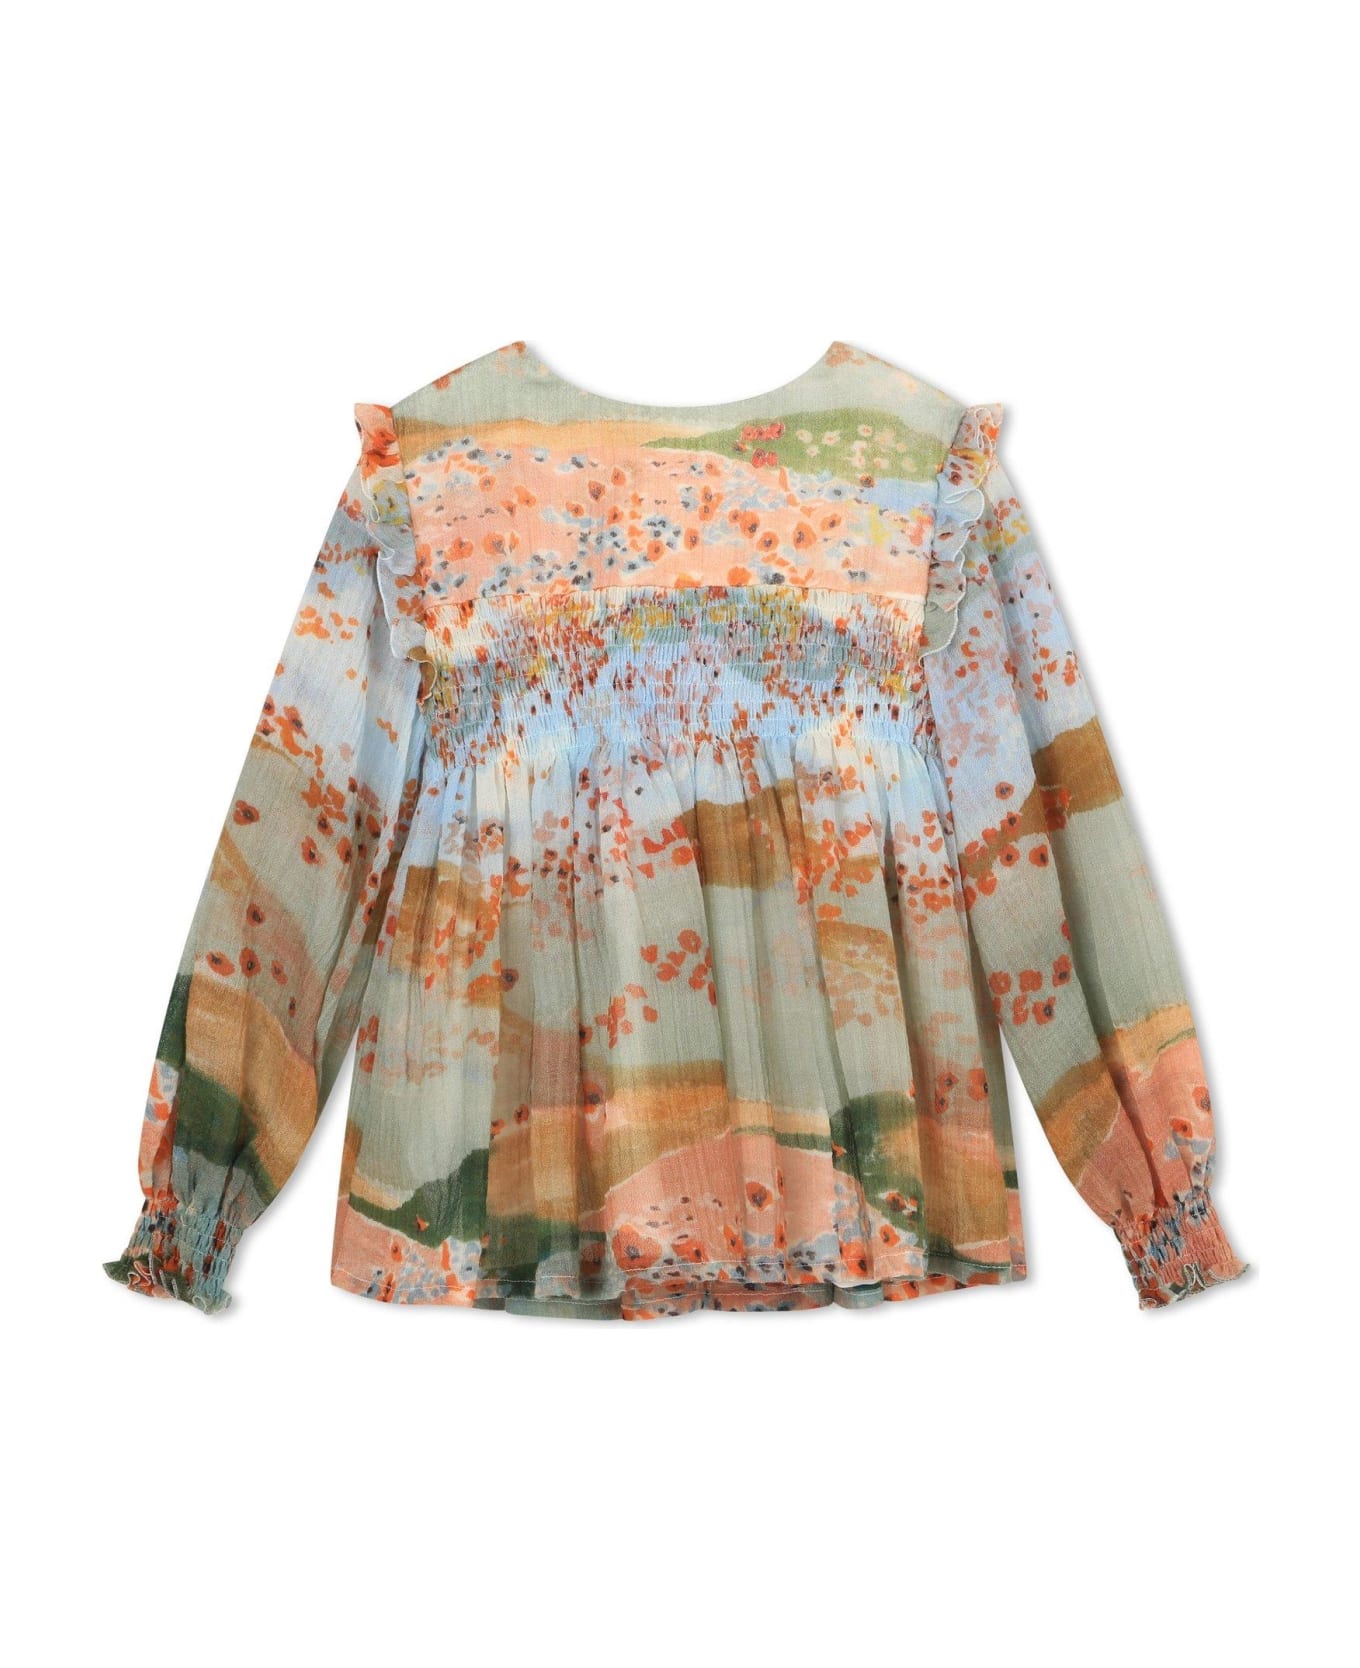 Chloé Ceremony Graphic Printed Ruffled Detail Blouse - Multicolor